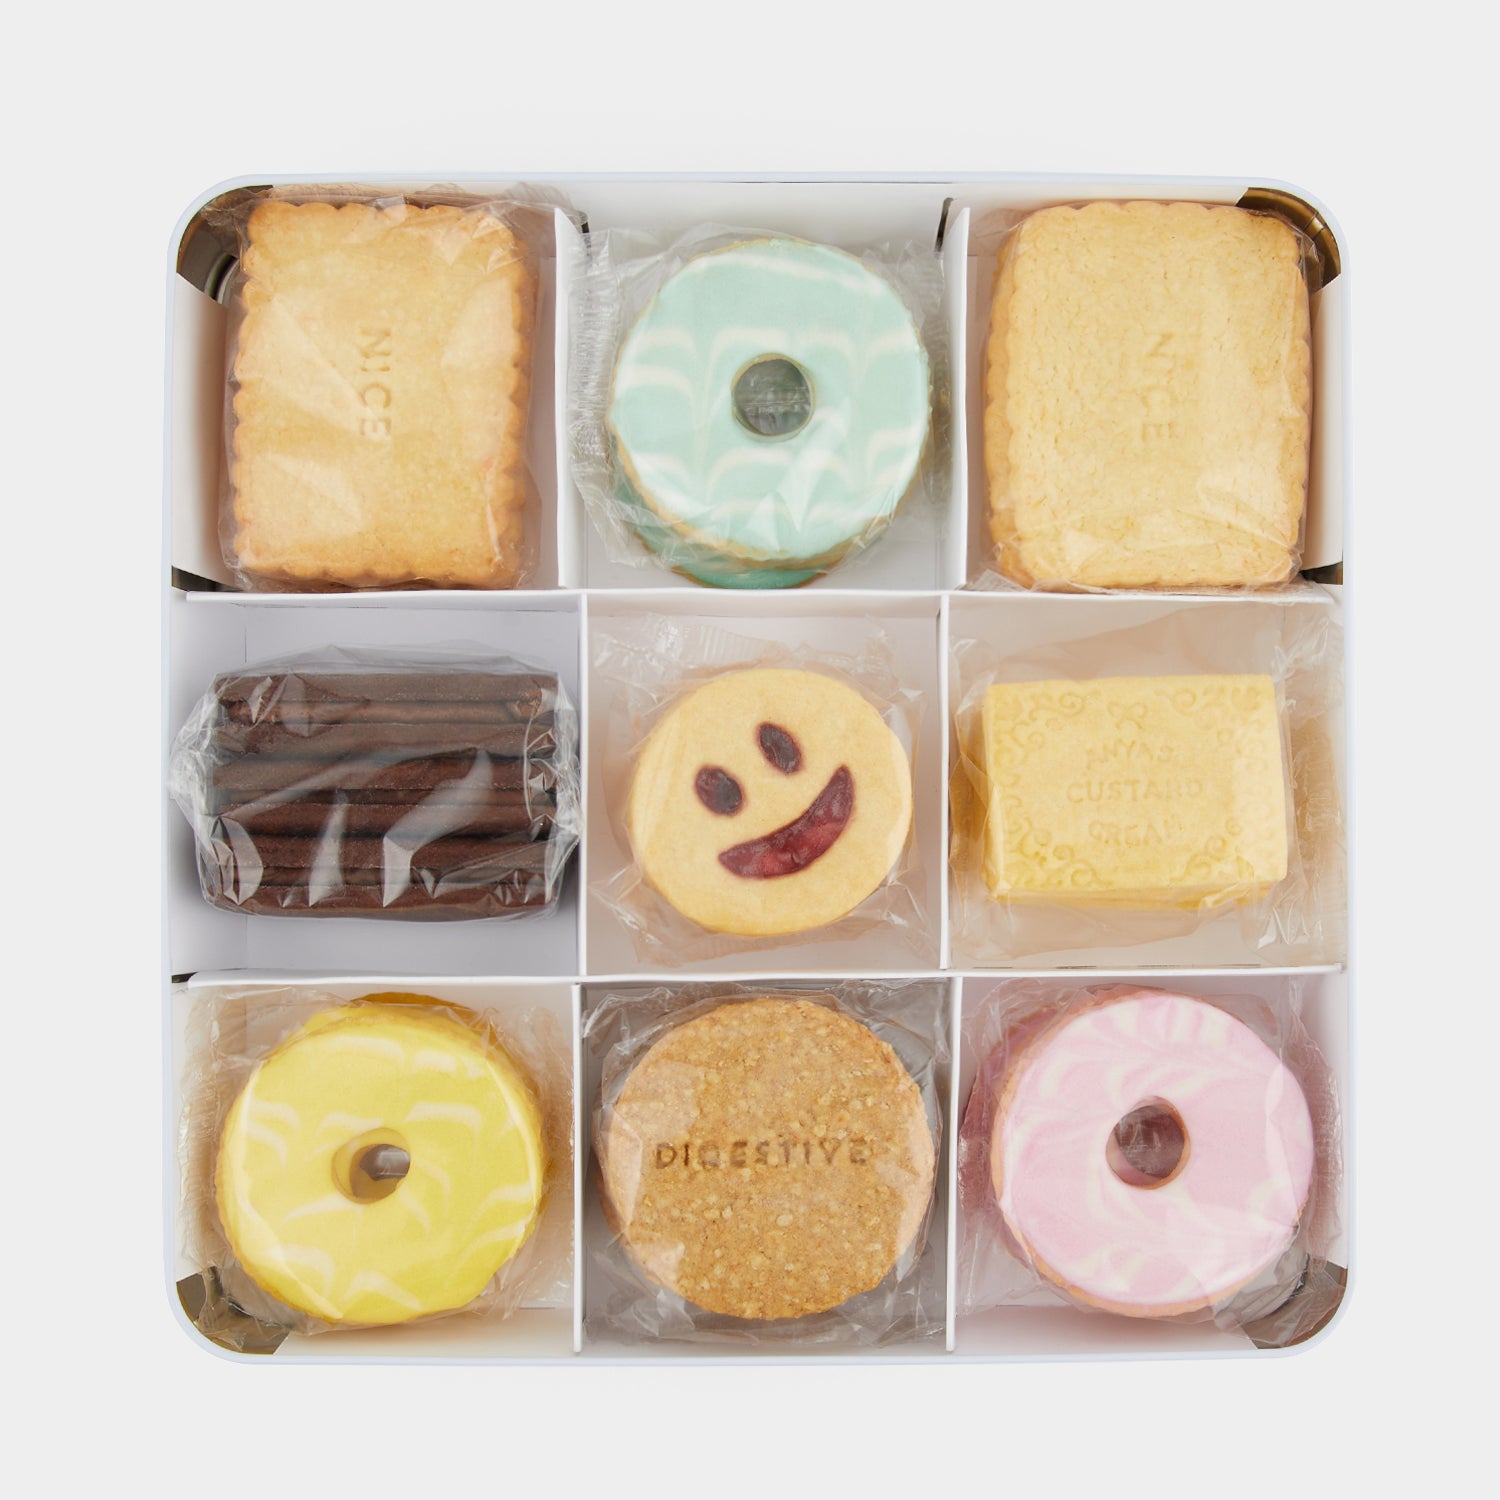 Favourite Family Biscuits -

                  
                    Biscuits -
                  

                  Anya Hindmarch UK
